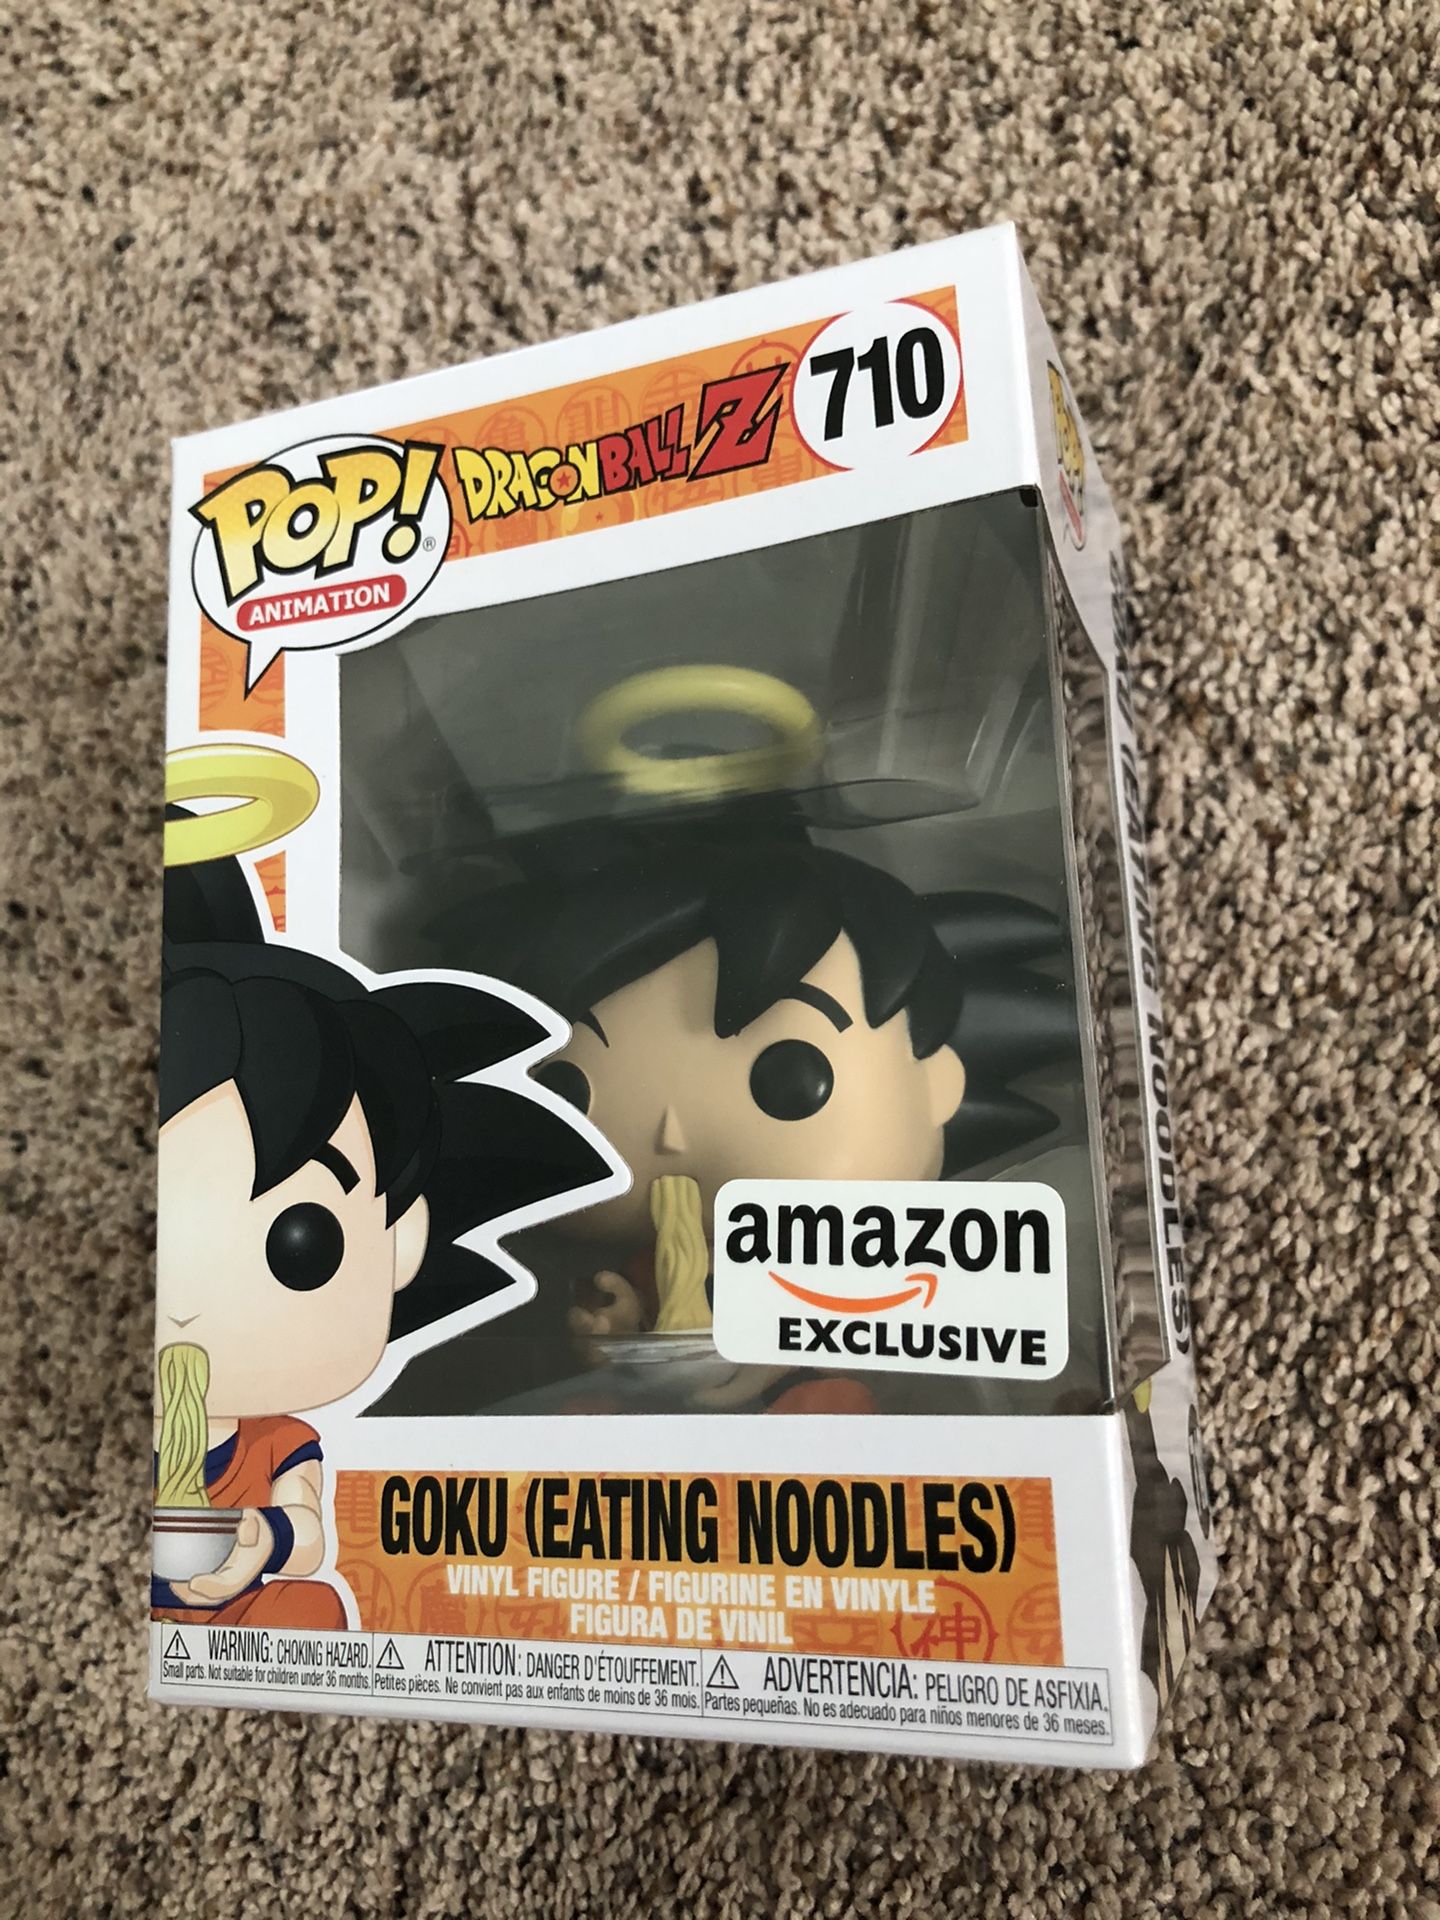 Funko Pop Vinyl - Dragonball Z - Goku Eating Noodles 🍜 (SOLD-OUT Amazon Exclusive) 🐉 💥